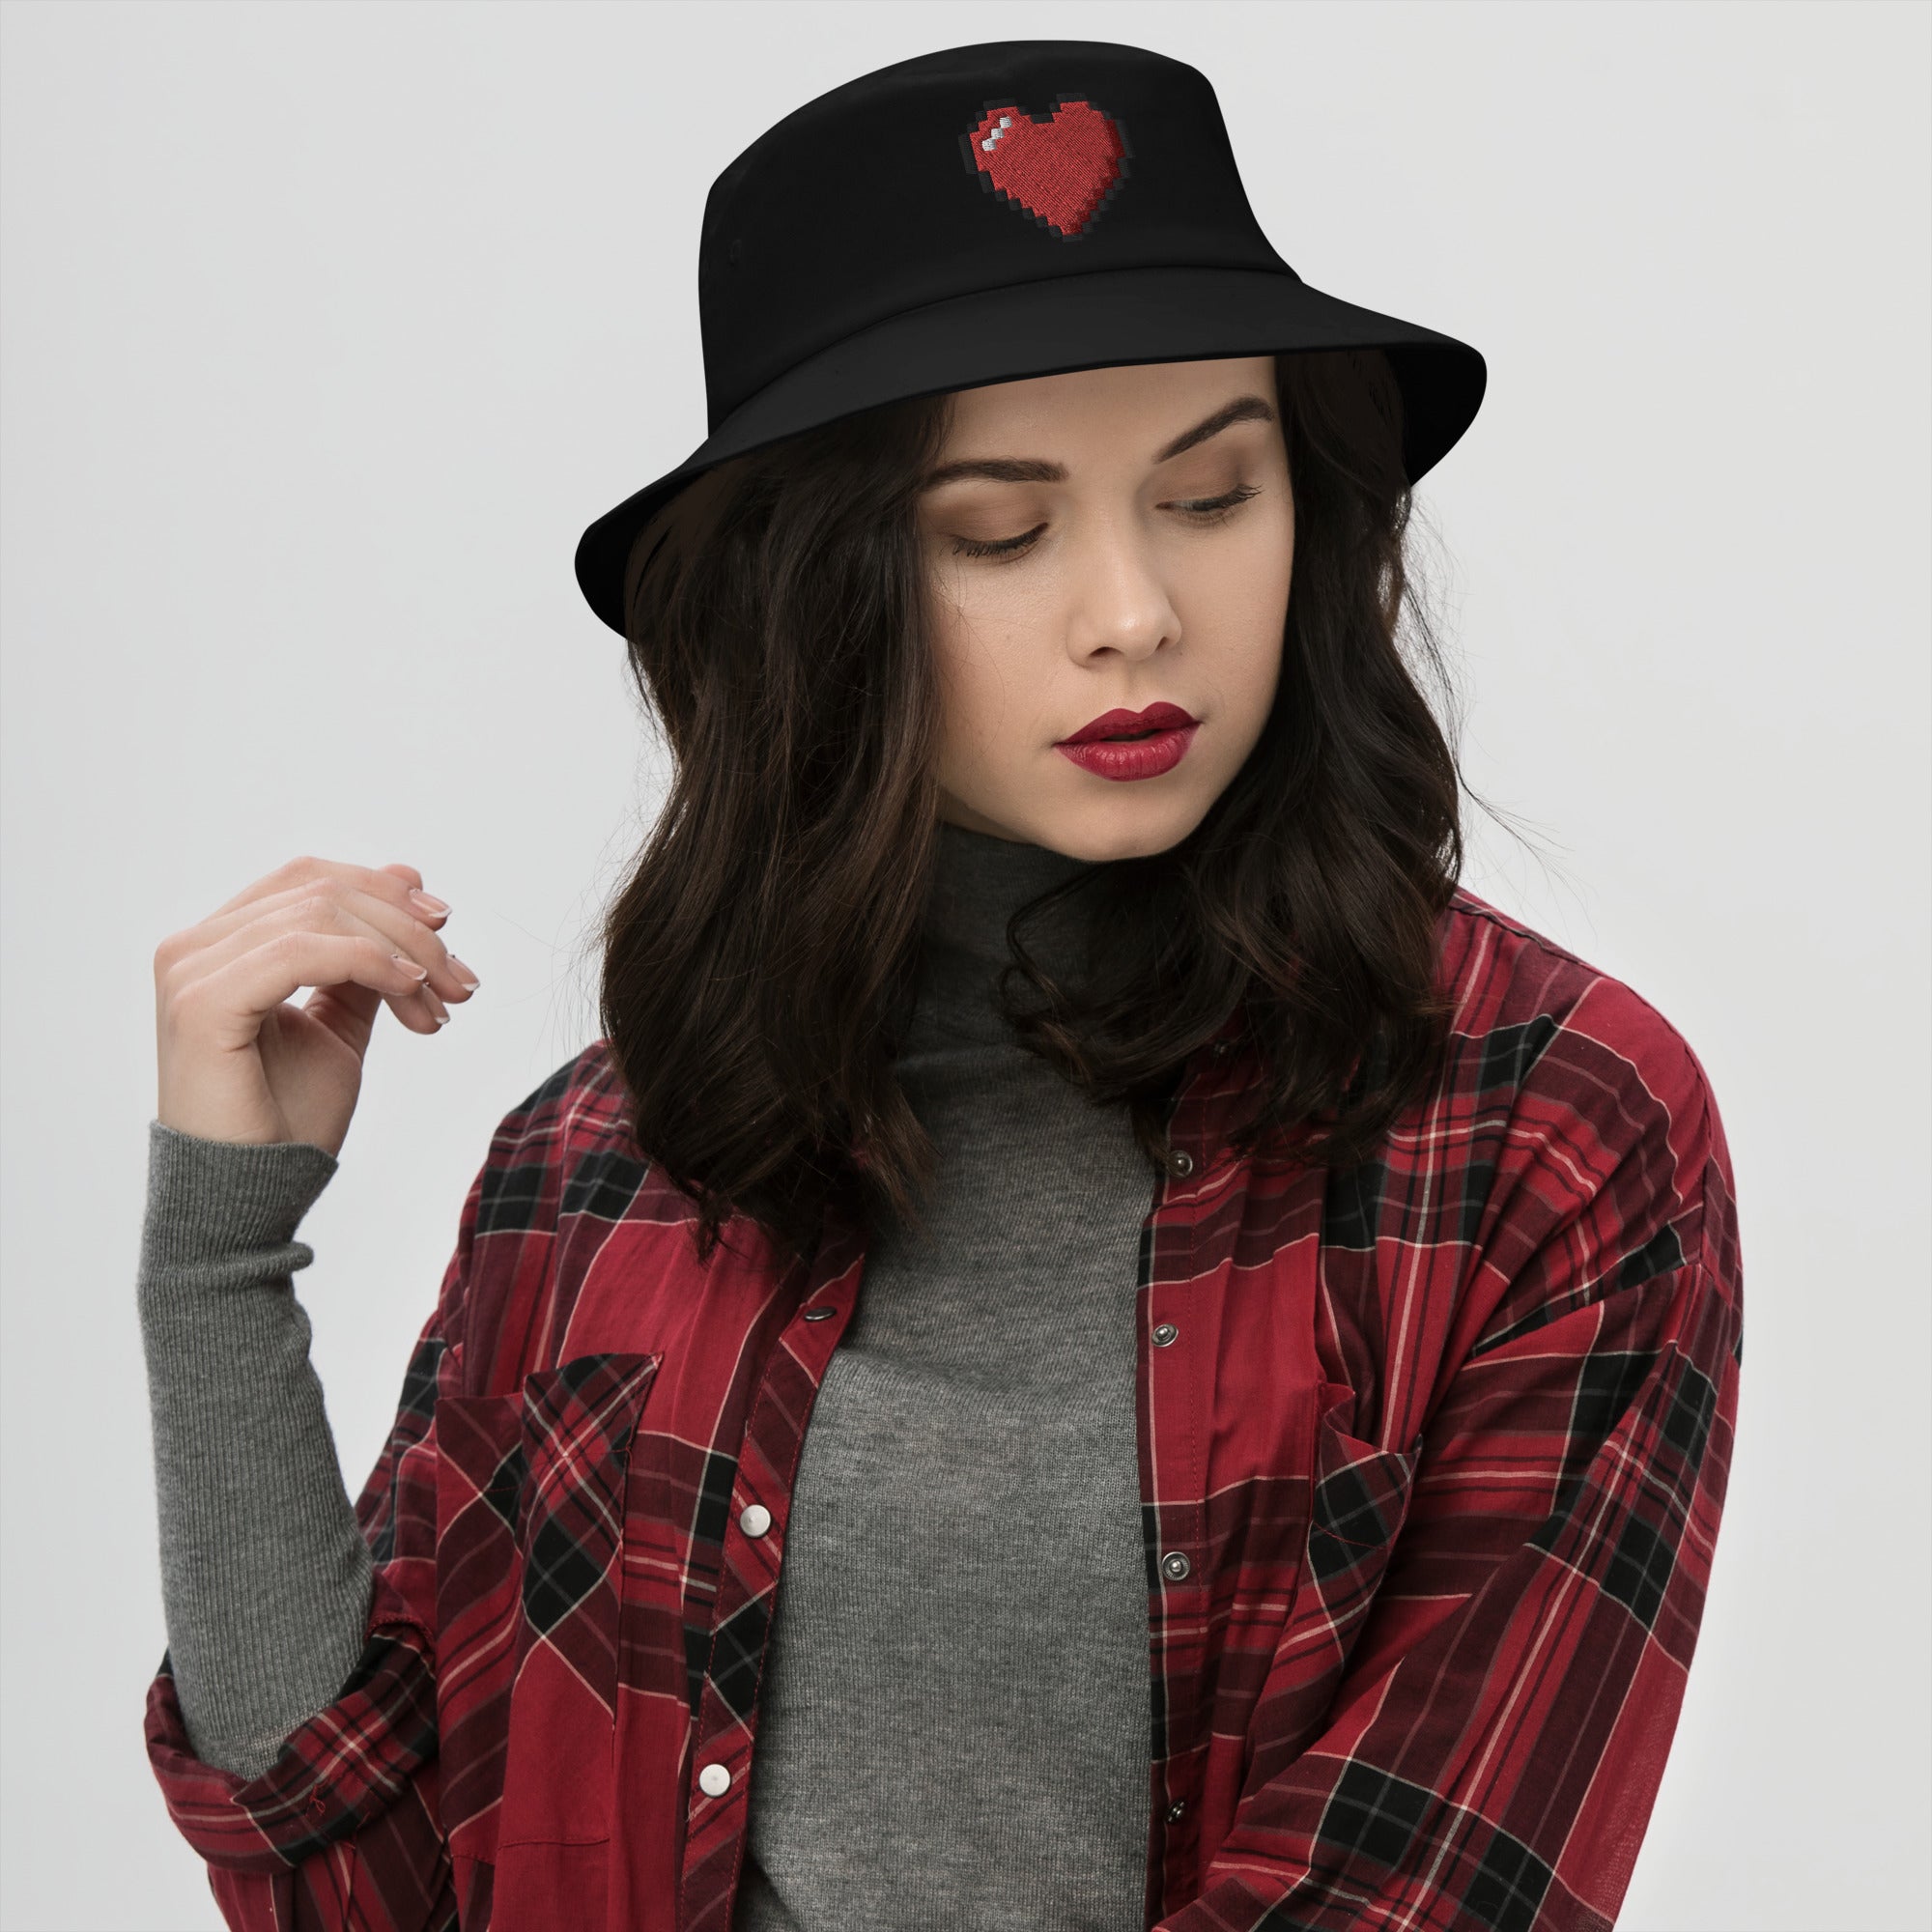 Retro 8 Bit Video Game Pixelated Heart Embroidered Bucket Hat